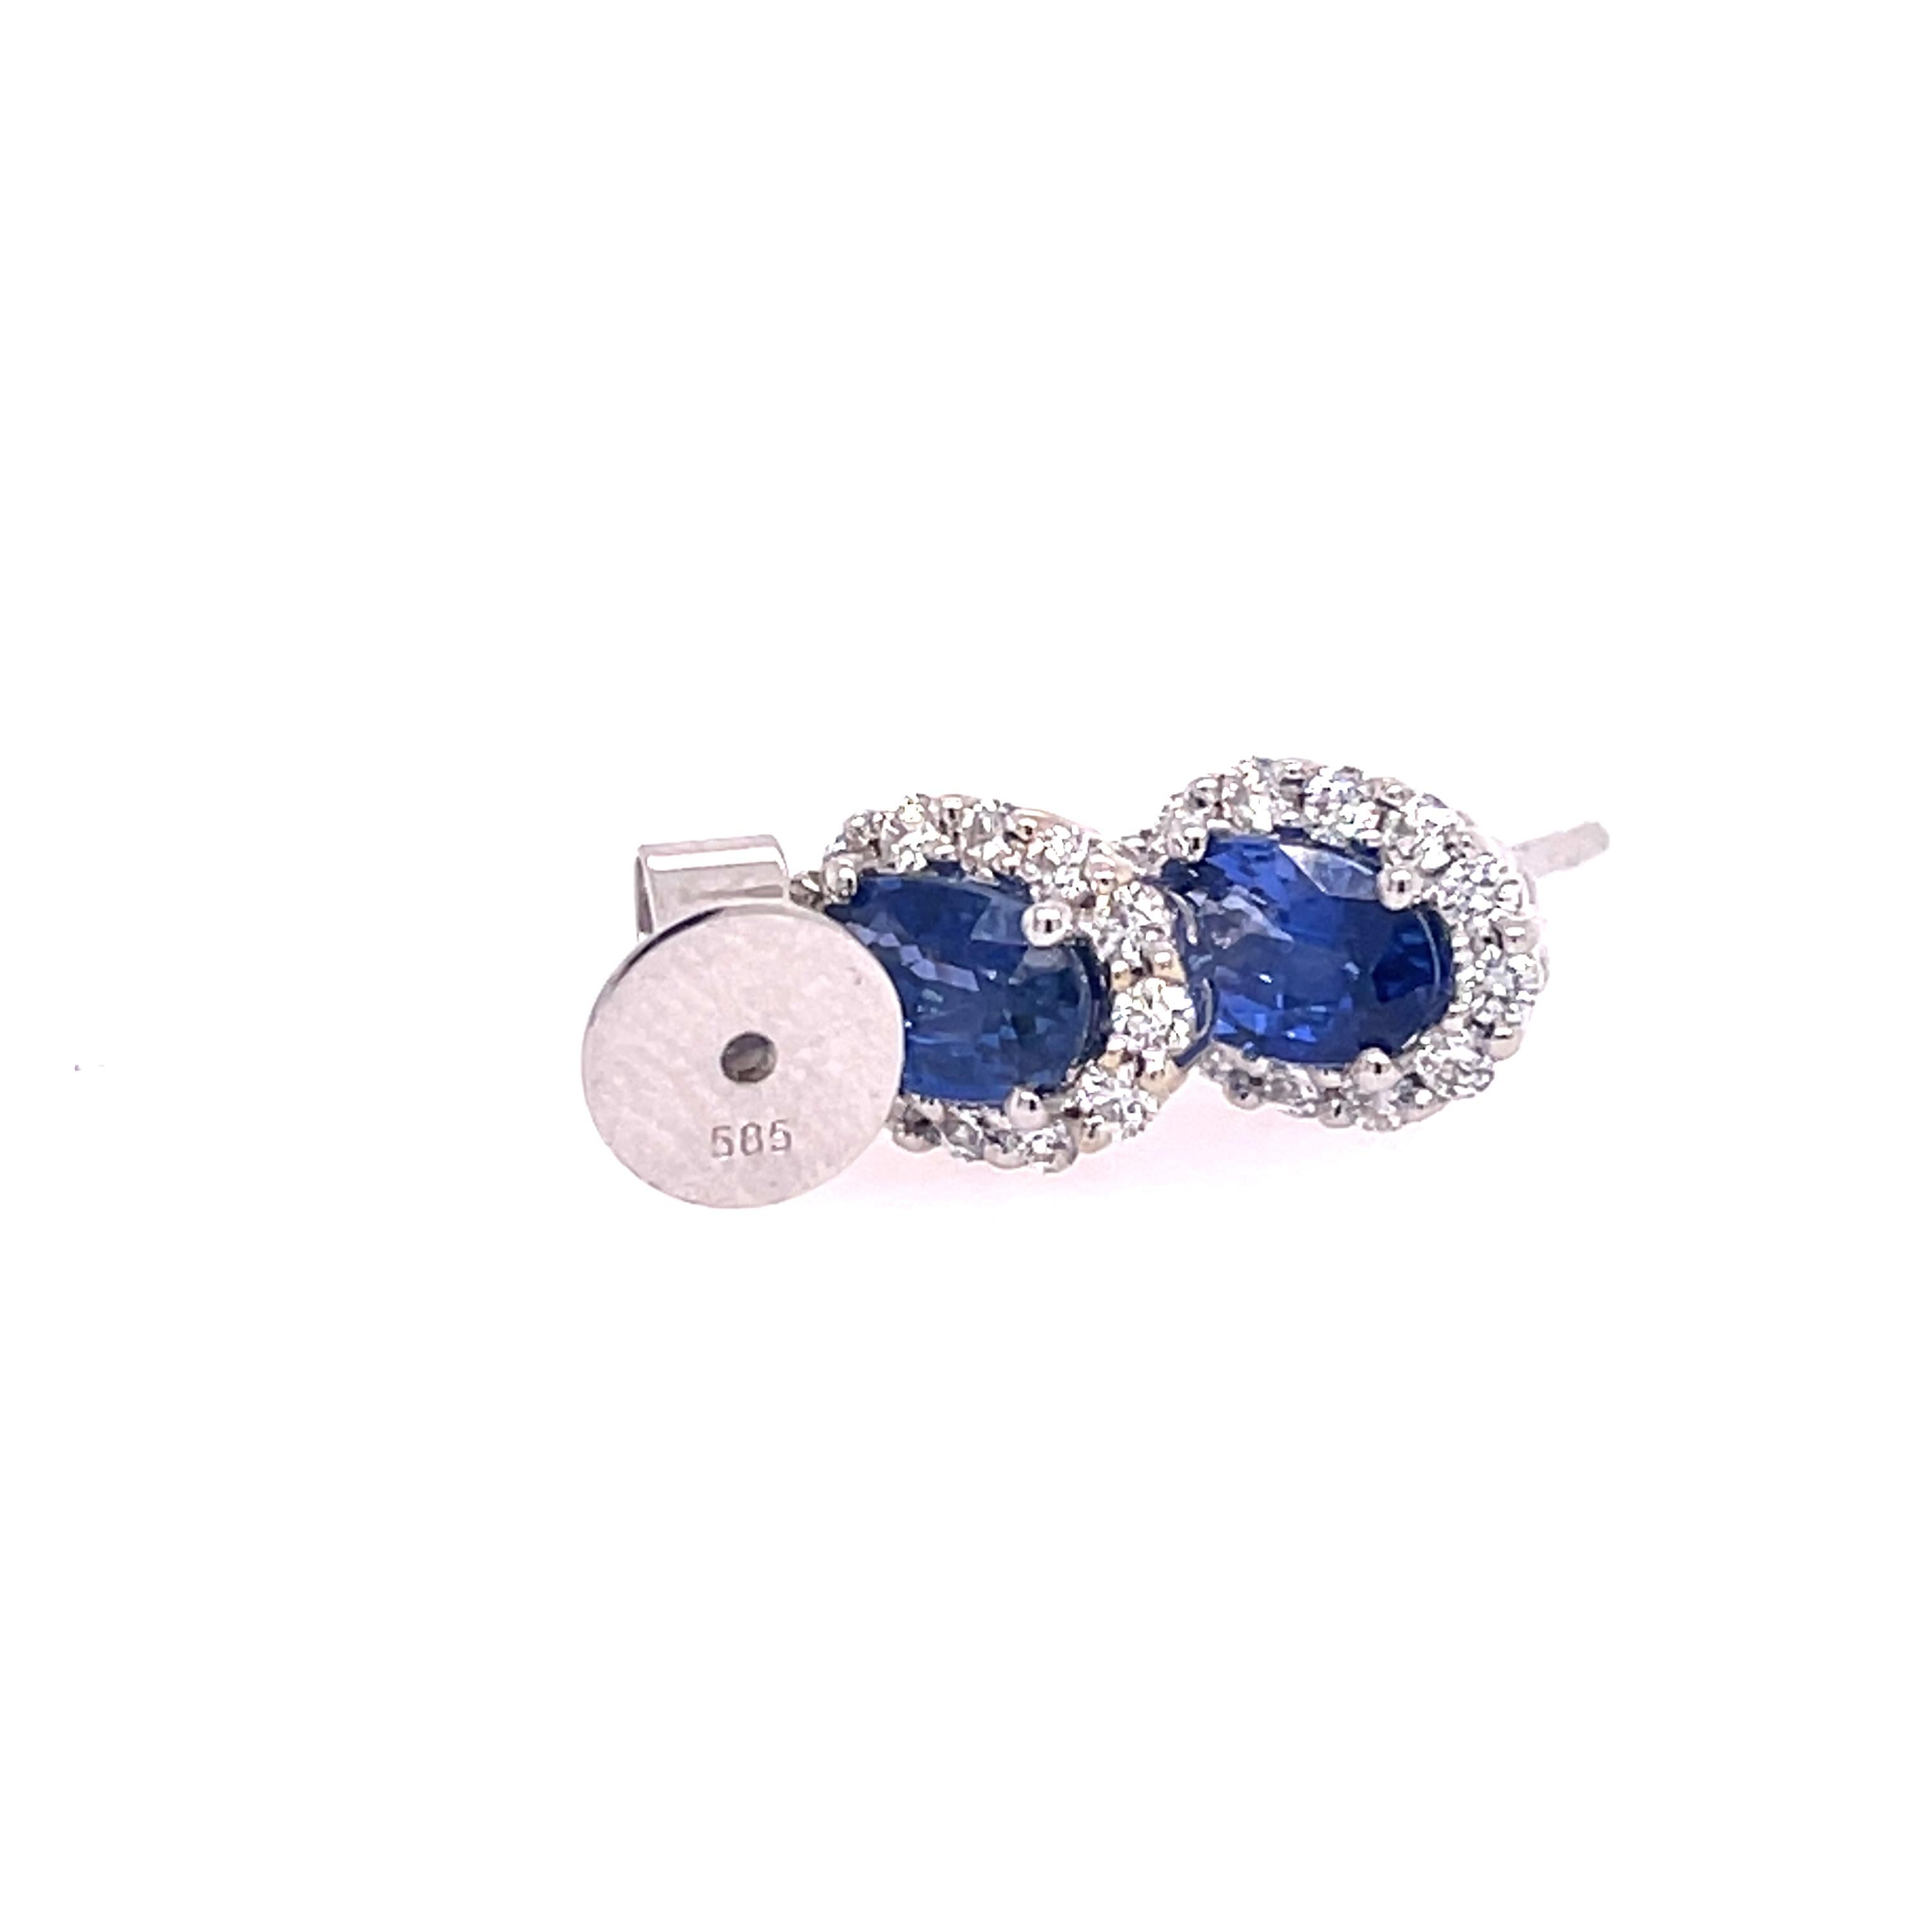 Sapphire and diamond studs in 14K white gold. The earrings feature 1.25ctw of oval sapphires with halos of 0.33ctw round diamonds. 